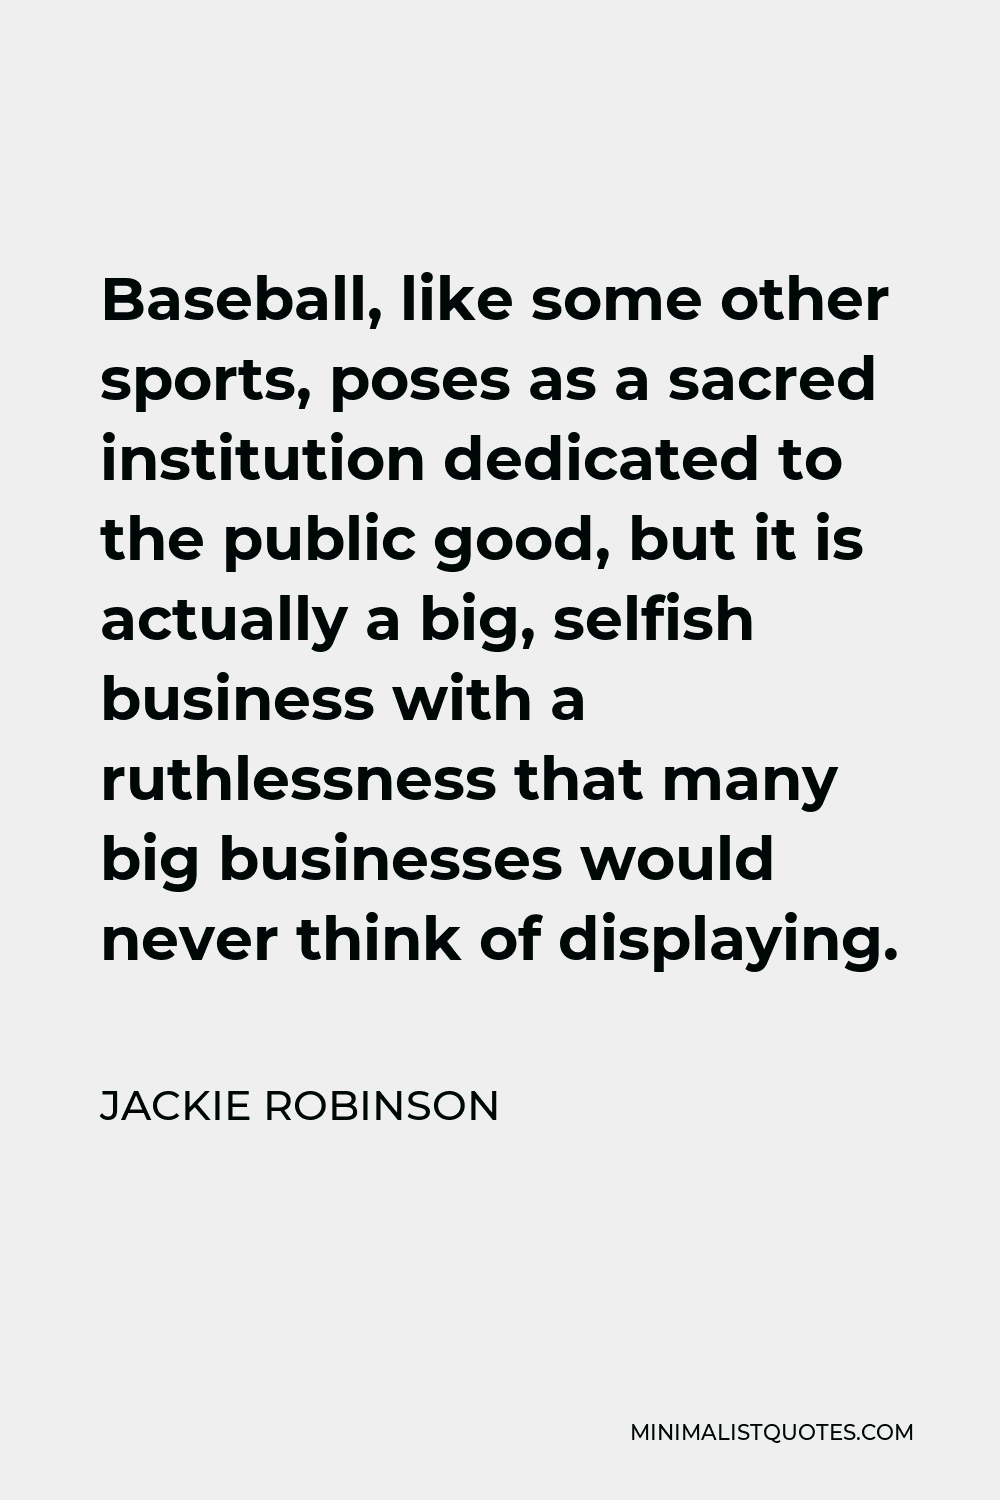 Jackie Robinson Quote - Baseball, like some other sports, poses as a sacred institution dedicated to the public good, but it is actually a big, selfish business with a ruthlessness that many big businesses would never think of displaying.